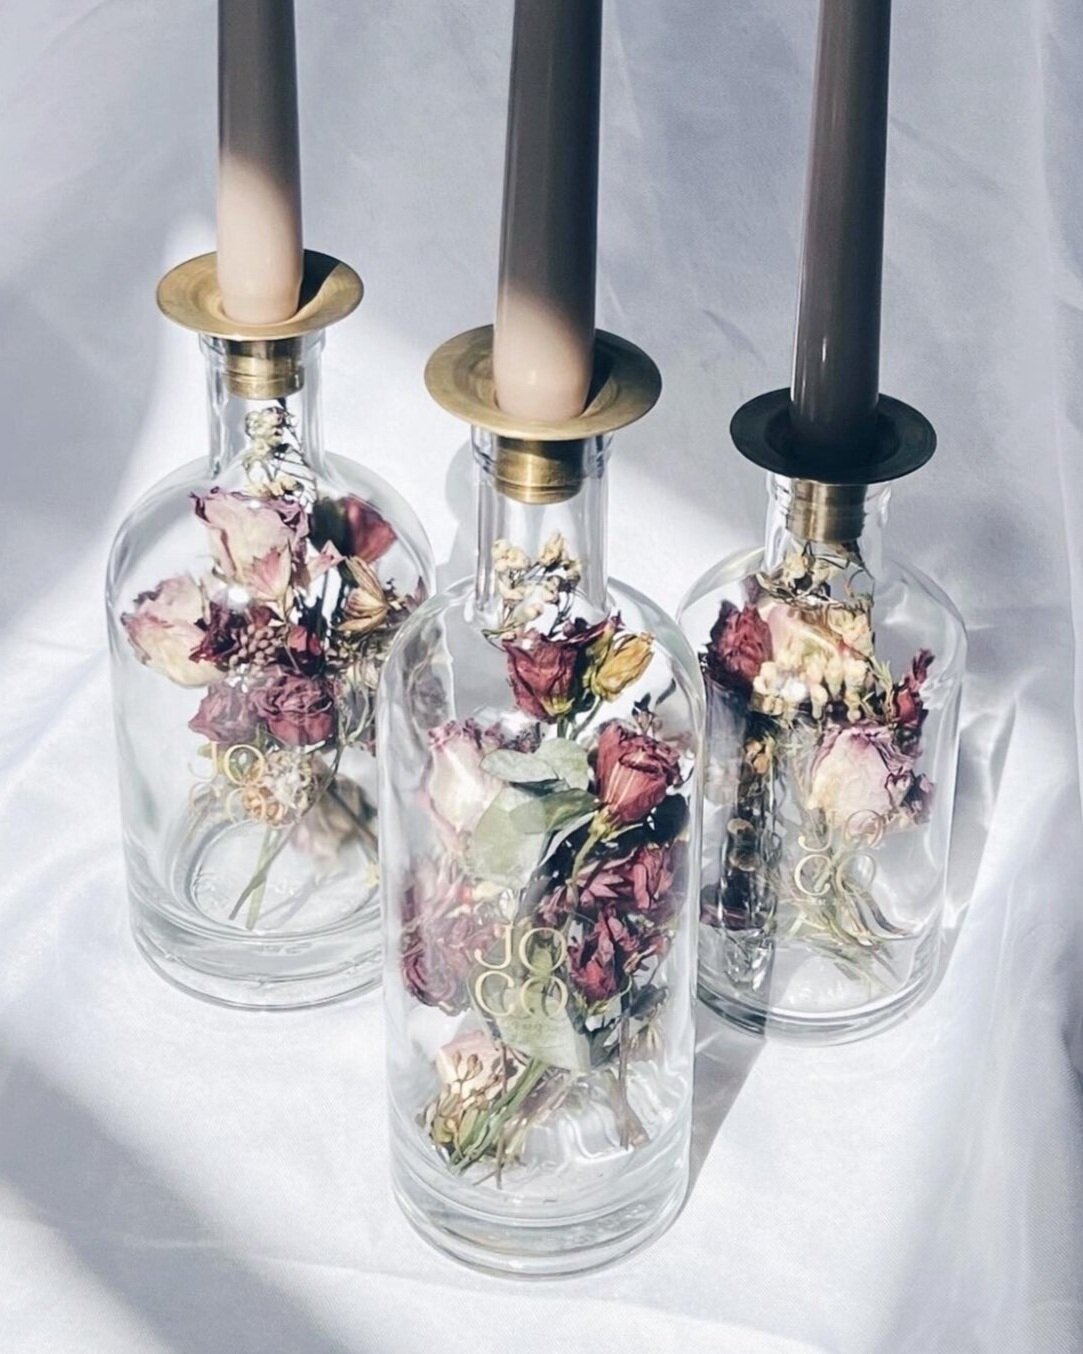 Pressed and dried flower candles perfect for bouquet preservation or gifts.